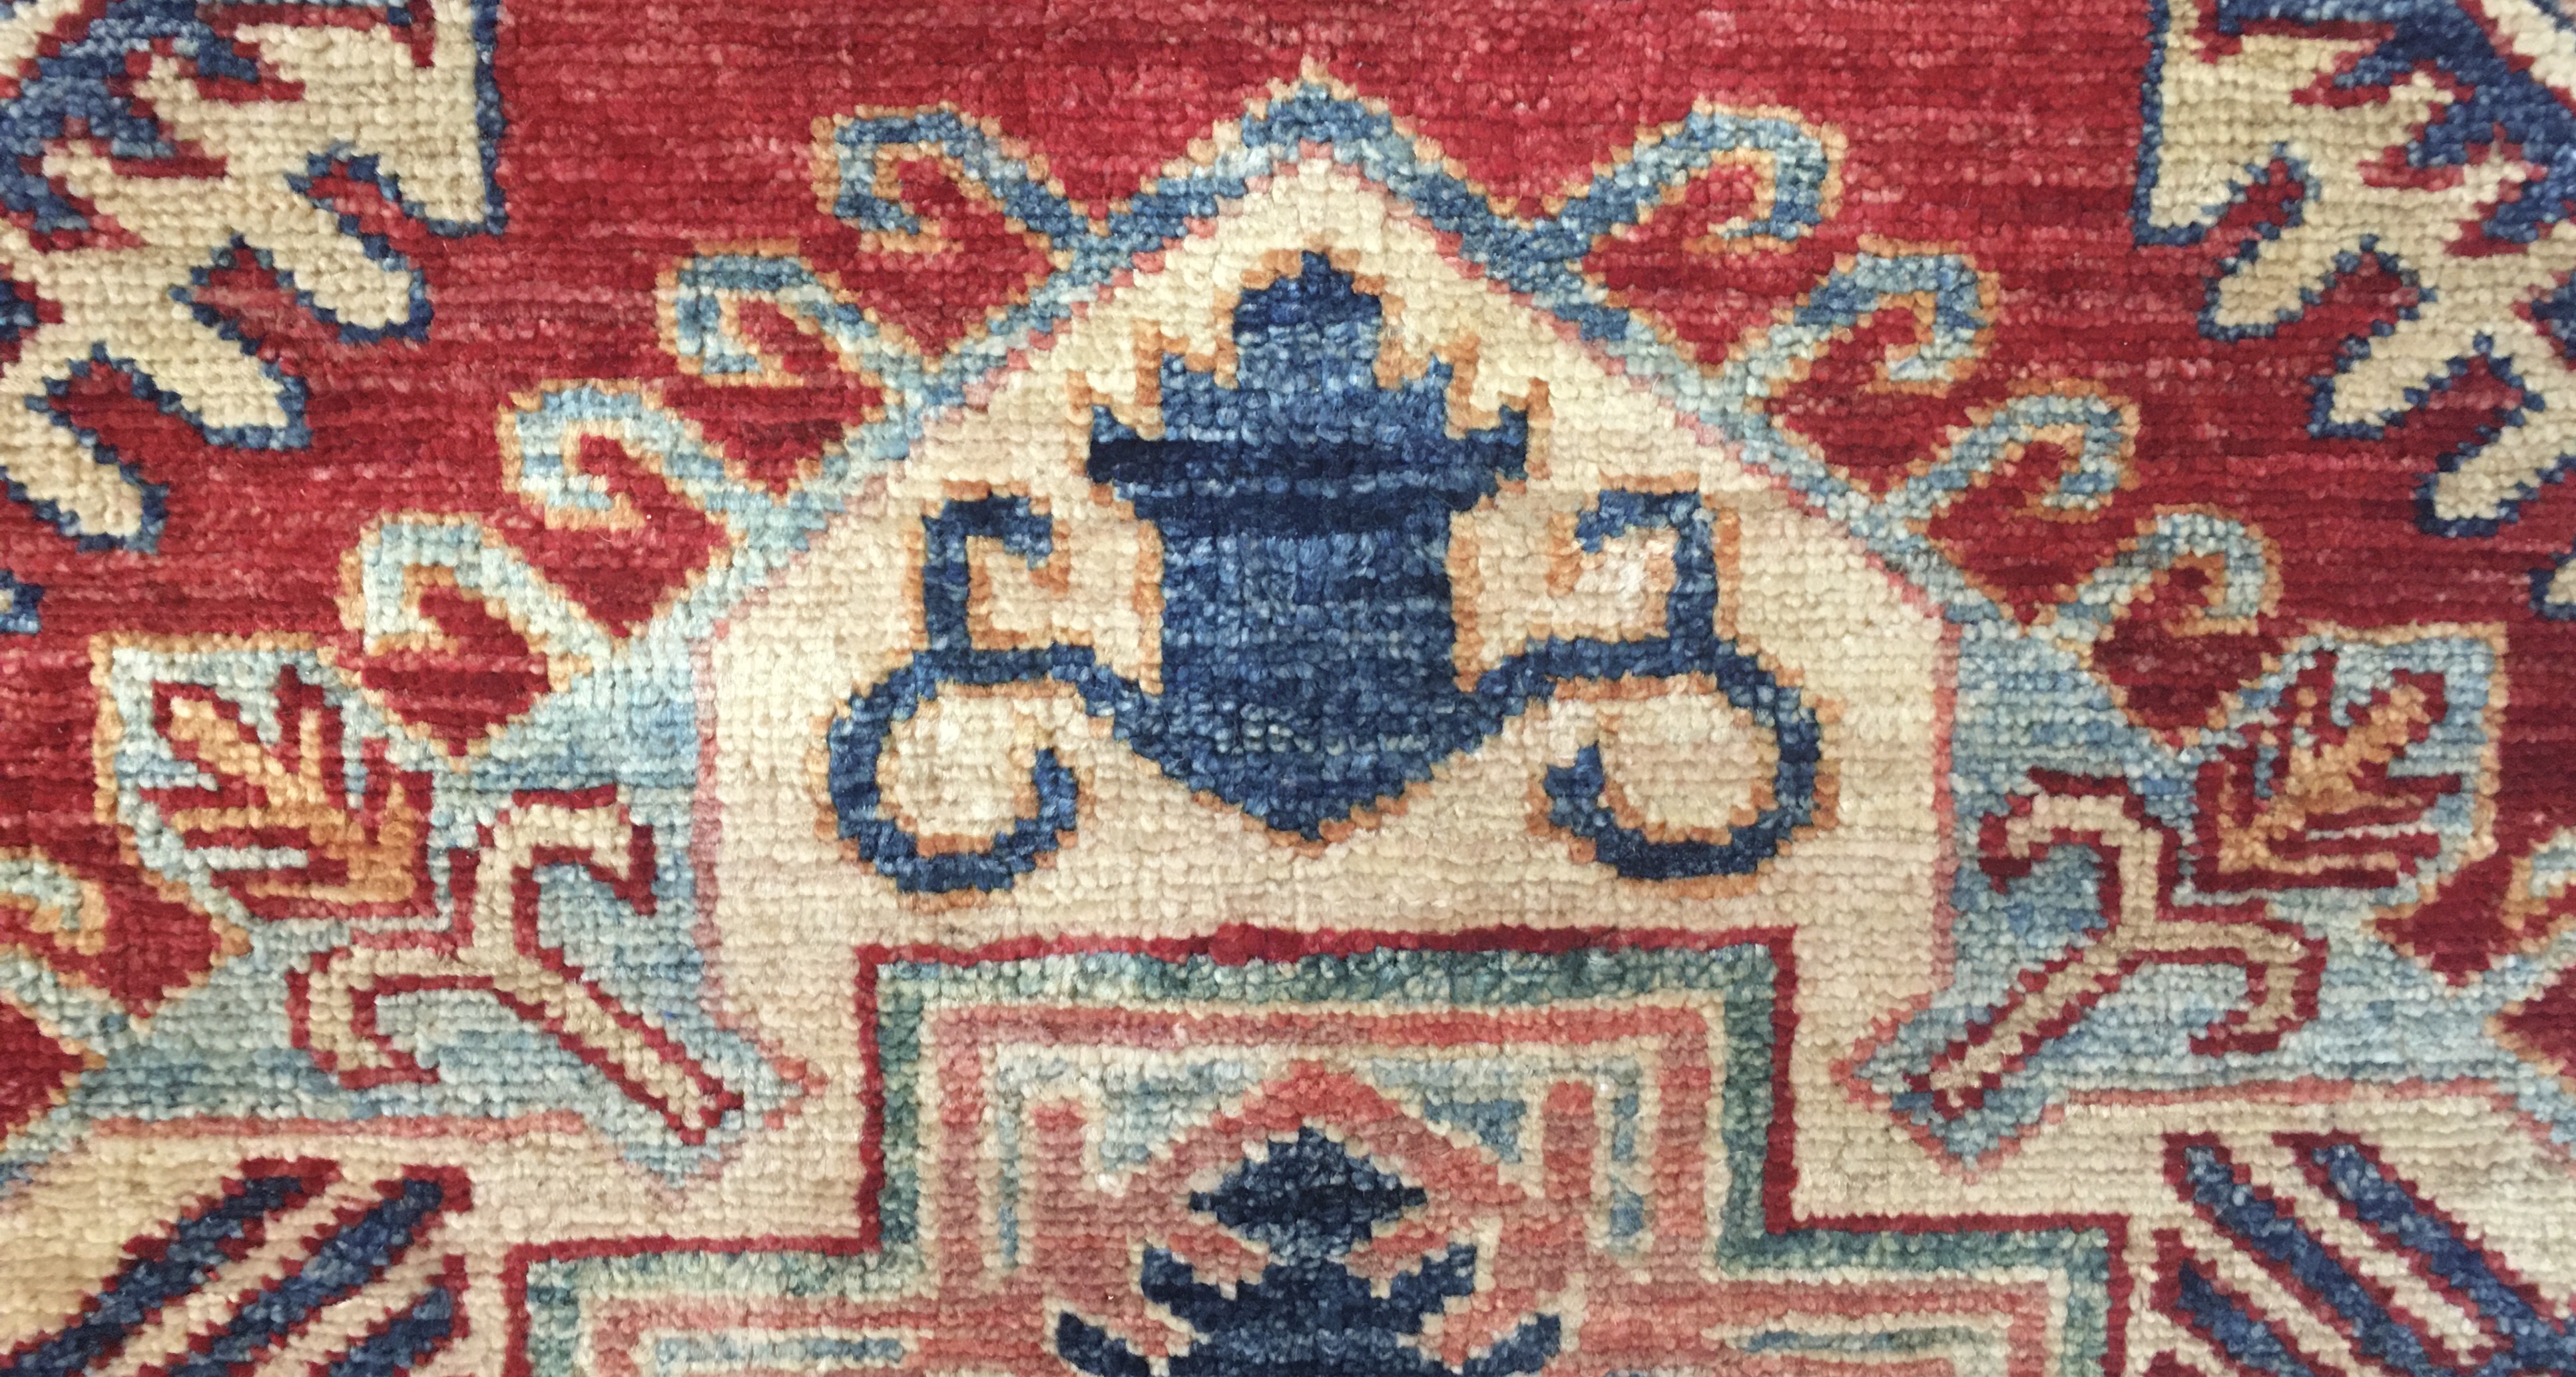 Detailed photo of symbolism woven into the rug